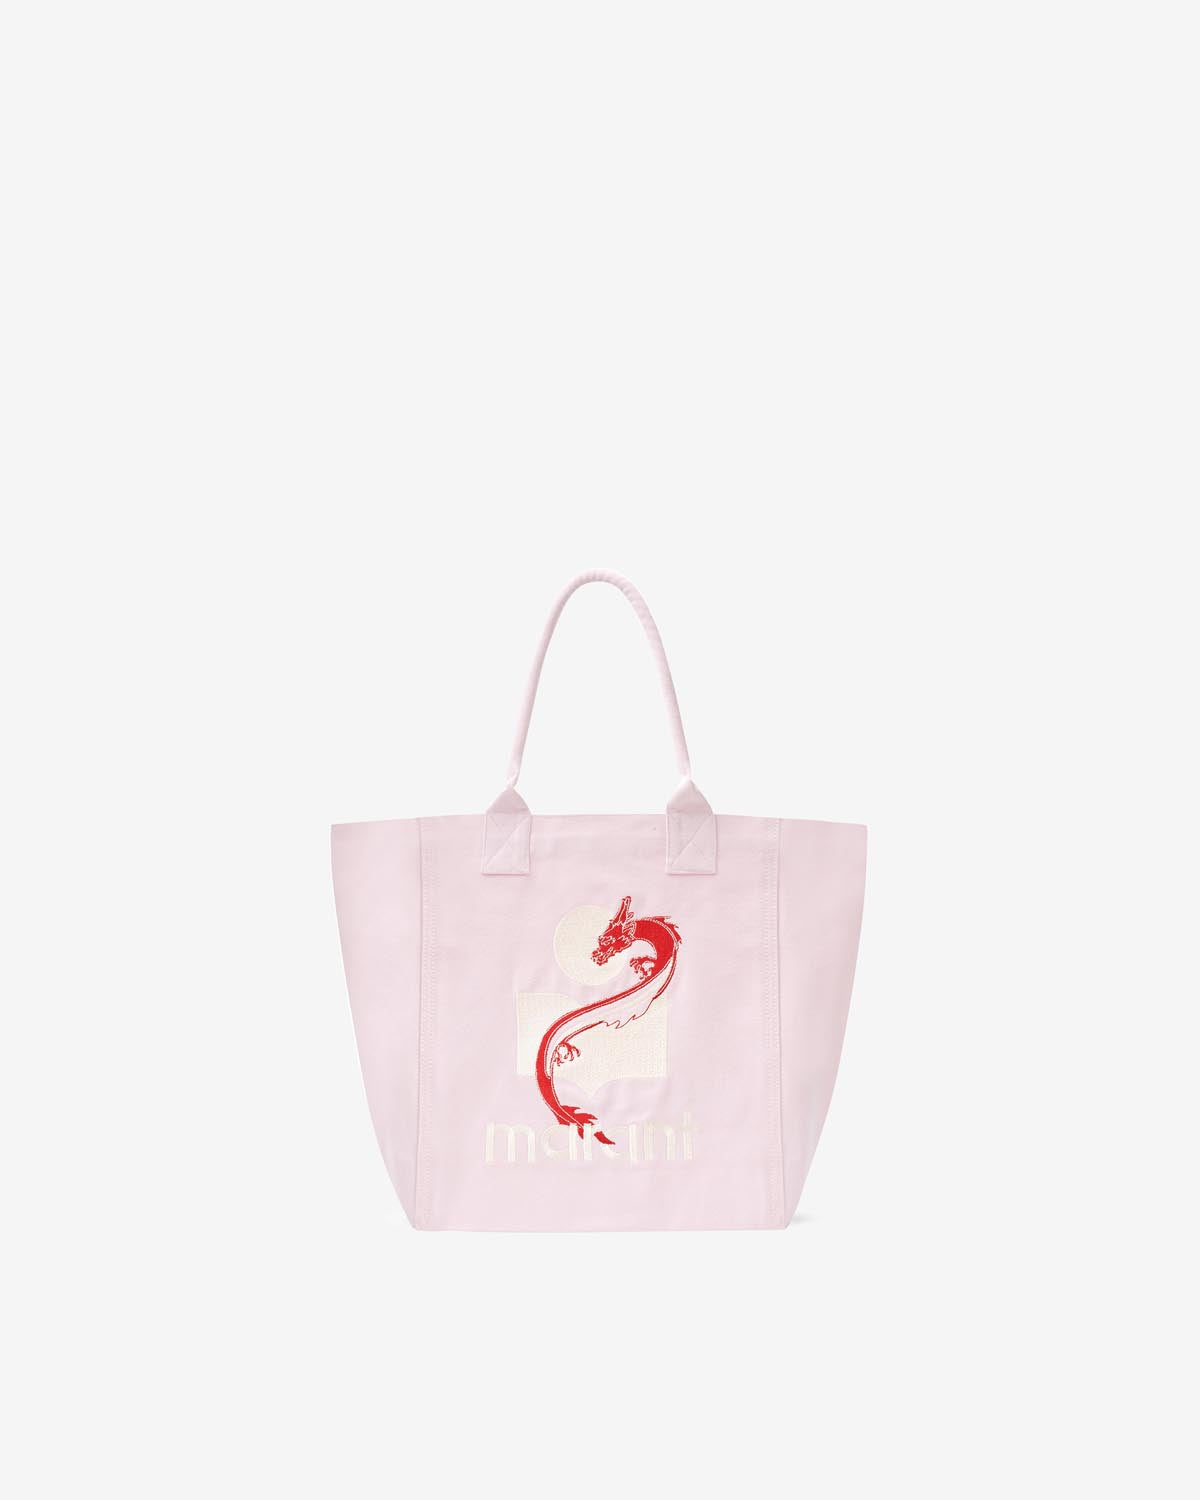 Tote bag yenky small Woman Rosa 3